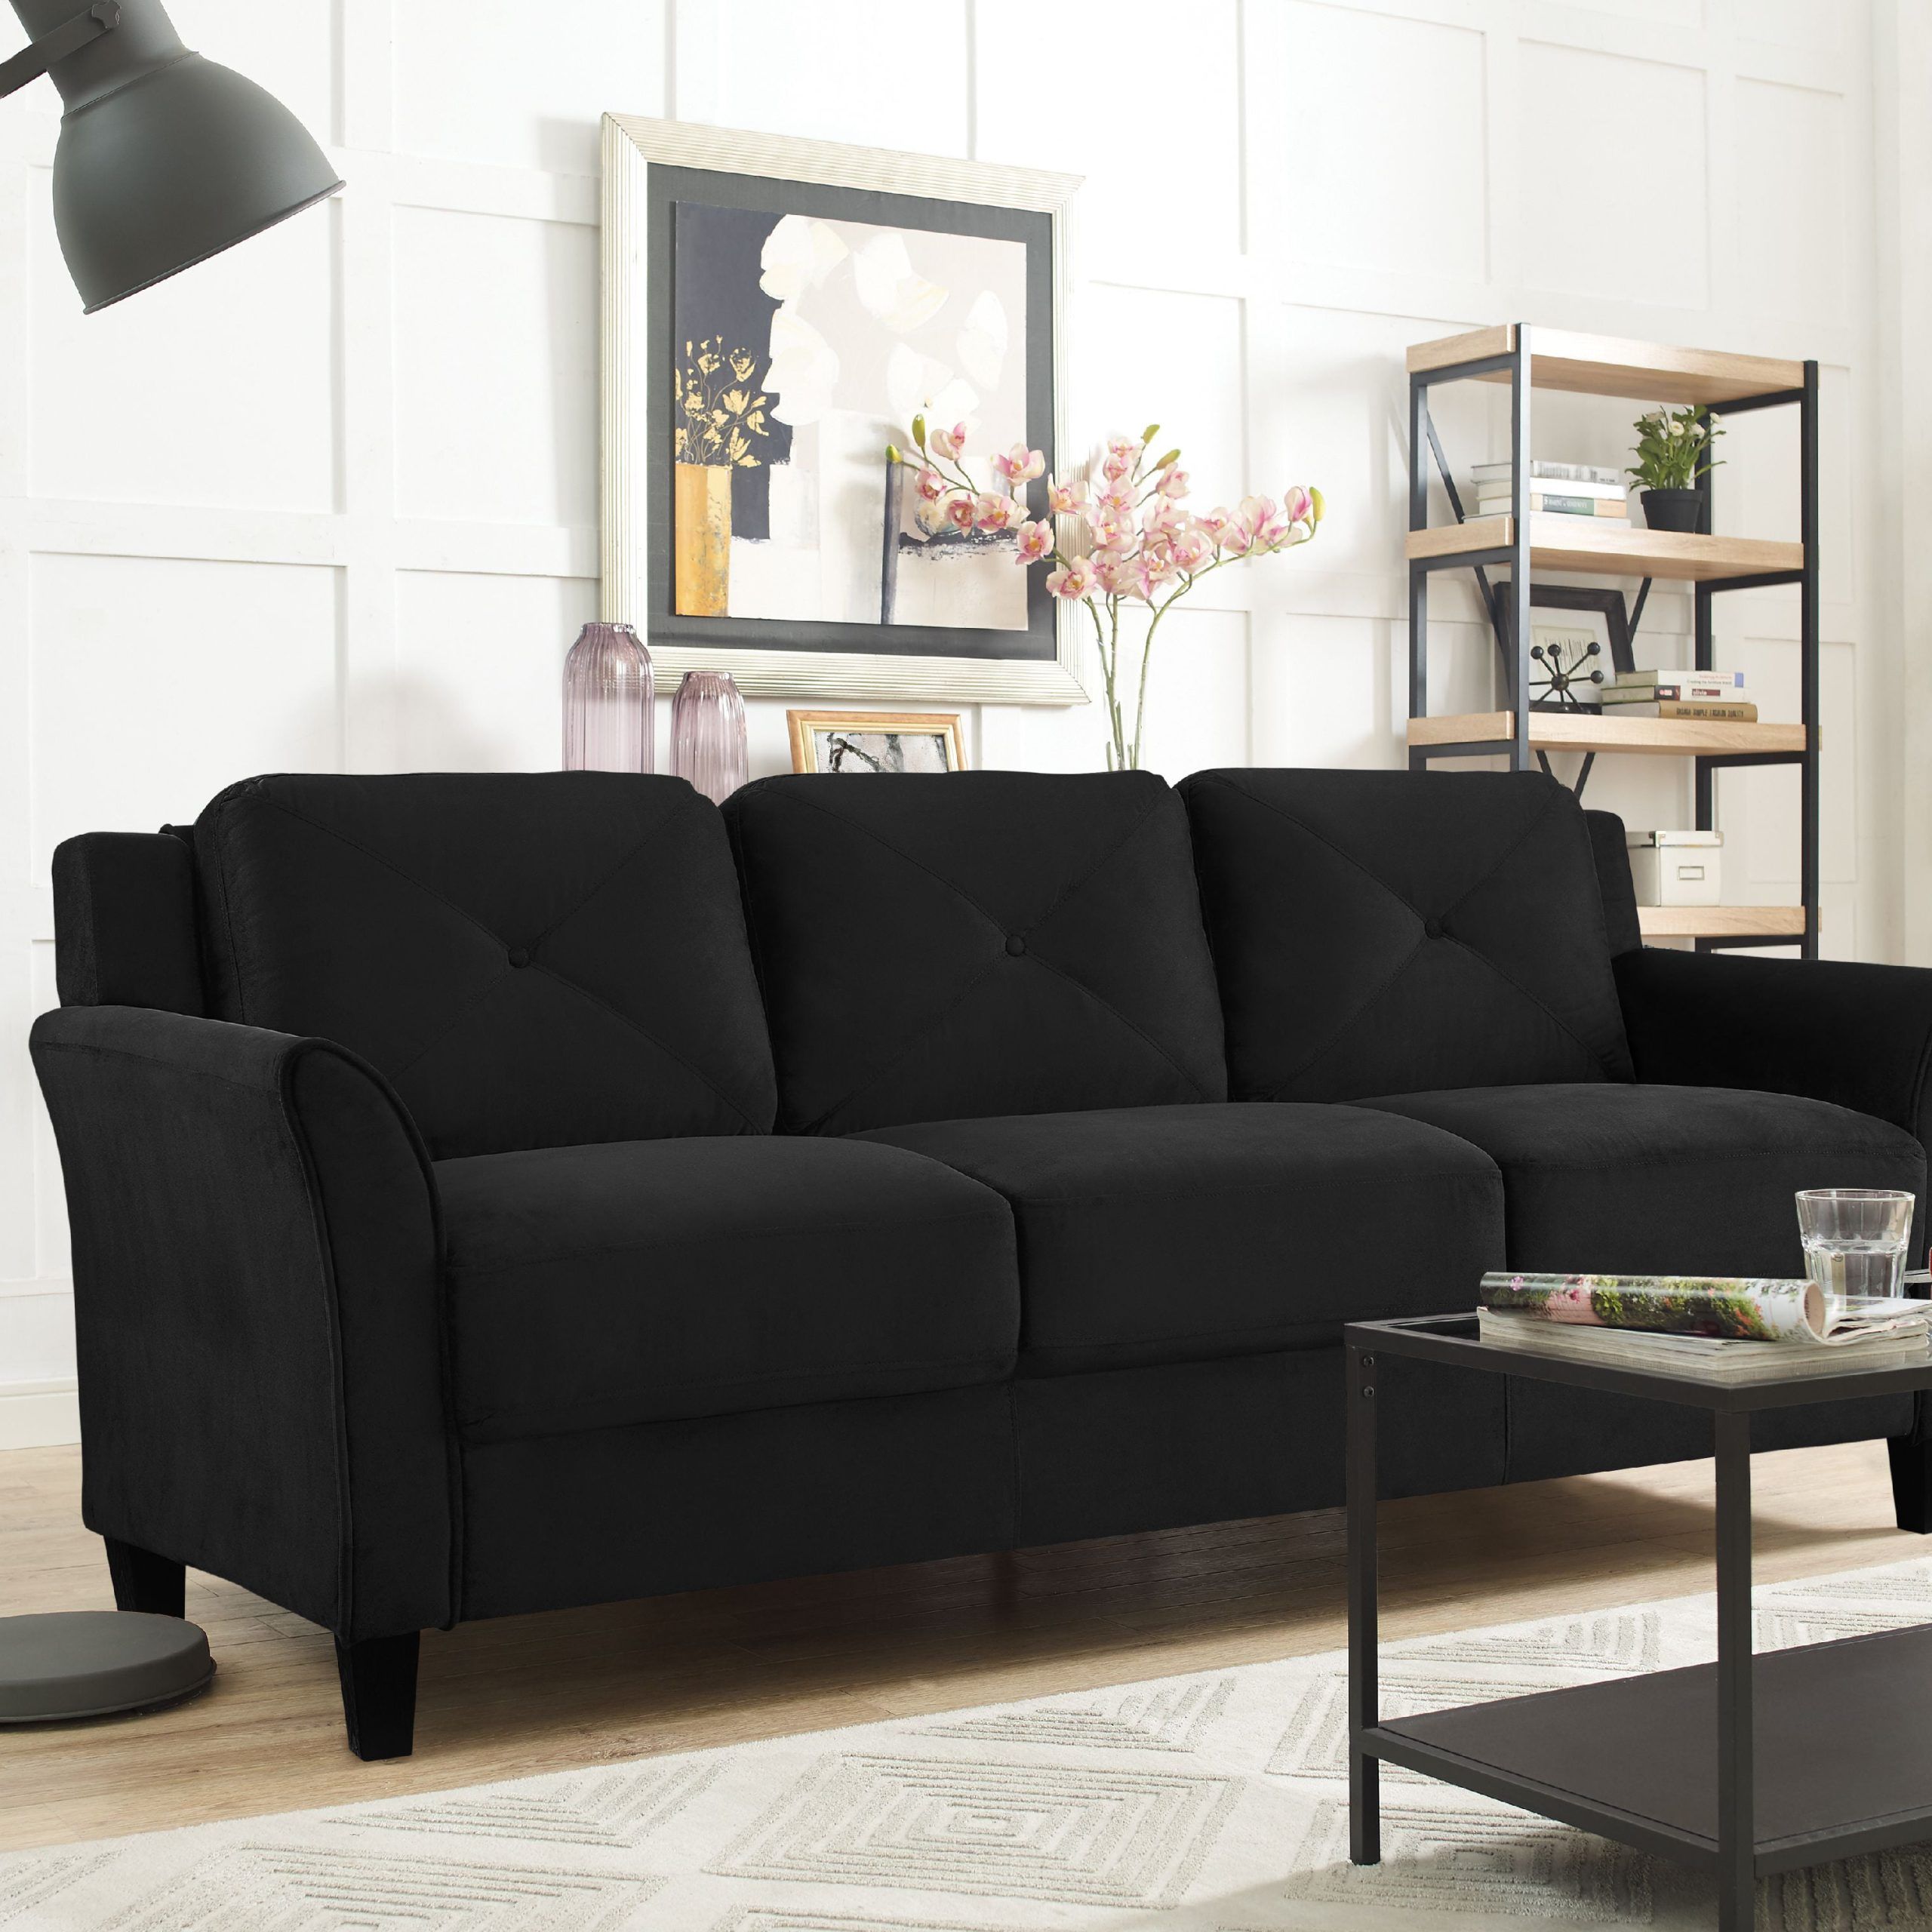 Lifestyle Solutions Taryn Curved Arm Fabric Sofa, Black – Walmart Throughout Right Facing Black Sofas (Gallery 14 of 20)